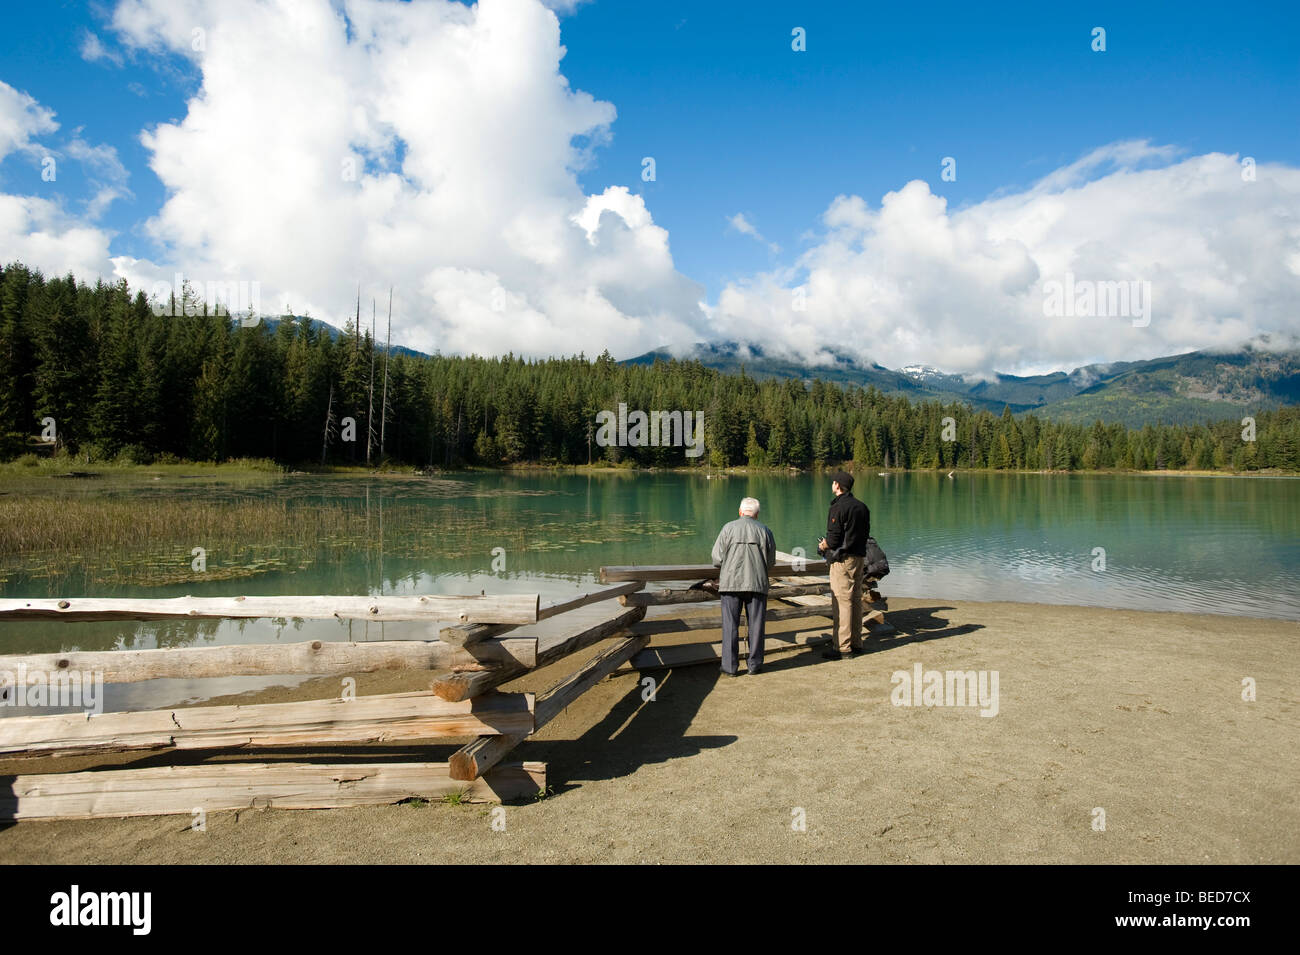 The Beach at Lost Lake Park. Whistler BC, Canada Stock Photo